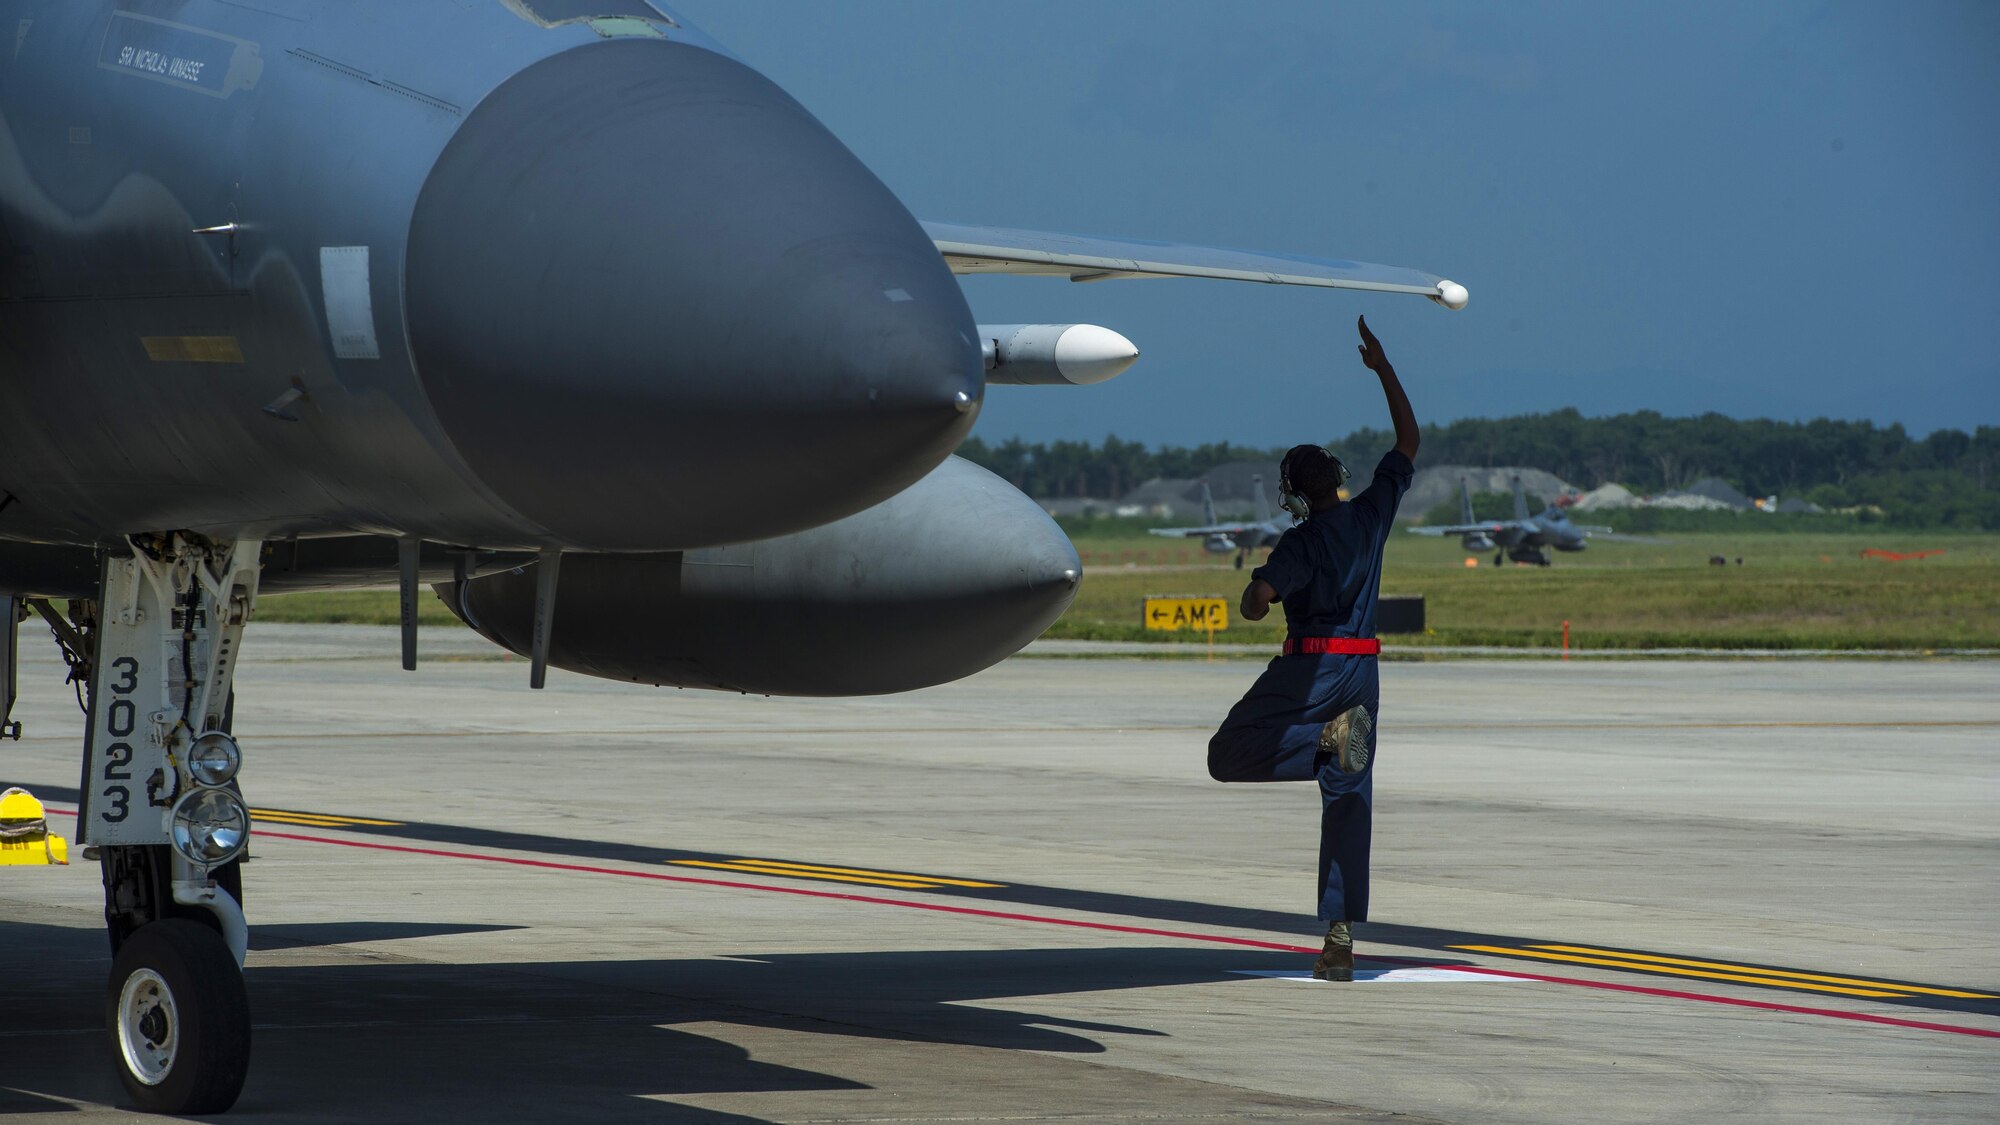 U.S. Air Force Senior Airman Devin Ross, an 18th Aircraft Maintenance Squadron crew chief, taps the wing of an F-15C Eagle prior to taxi at Misawa Air Base, Japan, June 13, 2017. Airmen and pilots from Kadena Air Base, Japan, and the 35th Fighter Wing, worked closely with Japan Air Self-Defense Force pilots to strengthen their bilateral partnership across the Indo-Asia-Pacific region. (U.S. Air Force photo by Staff Sgt. Deana Heitzman)